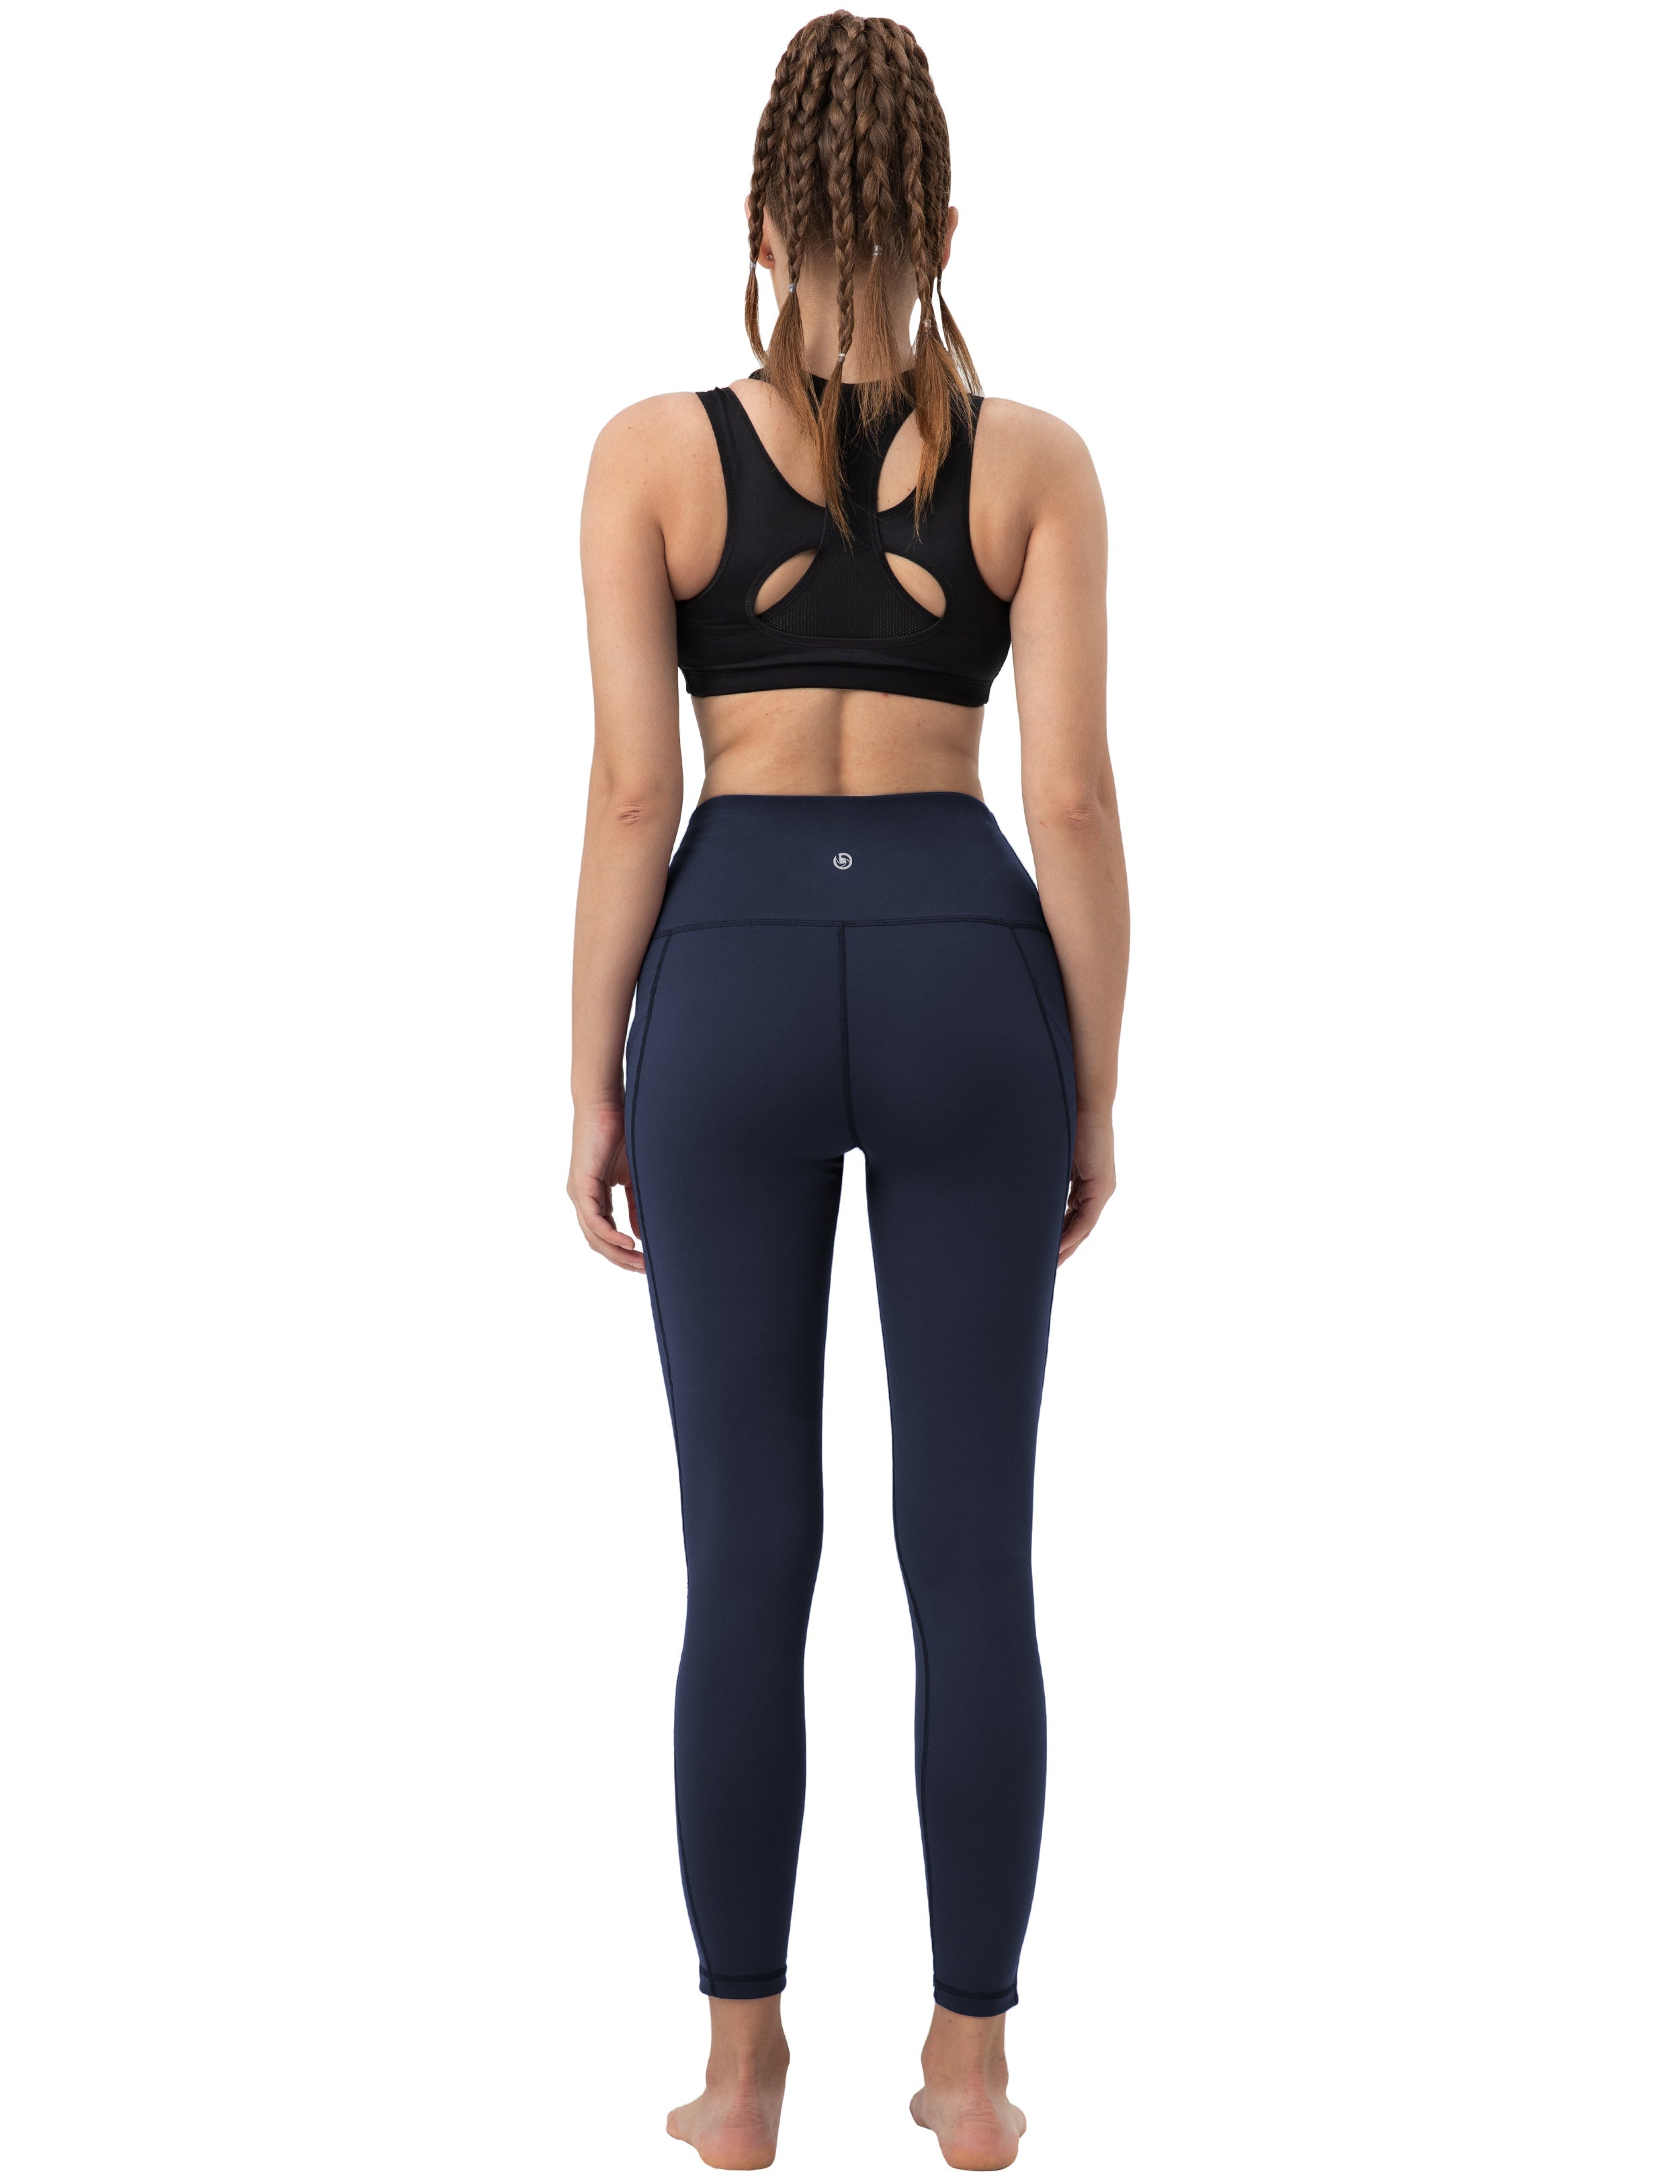 High Waist Side Pockets Pilates Pants darknavy 75% Nylon, 25% Spandex Fabric doesn't attract lint easily 4-way stretch No see-through Moisture-wicking Tummy control Inner pocket